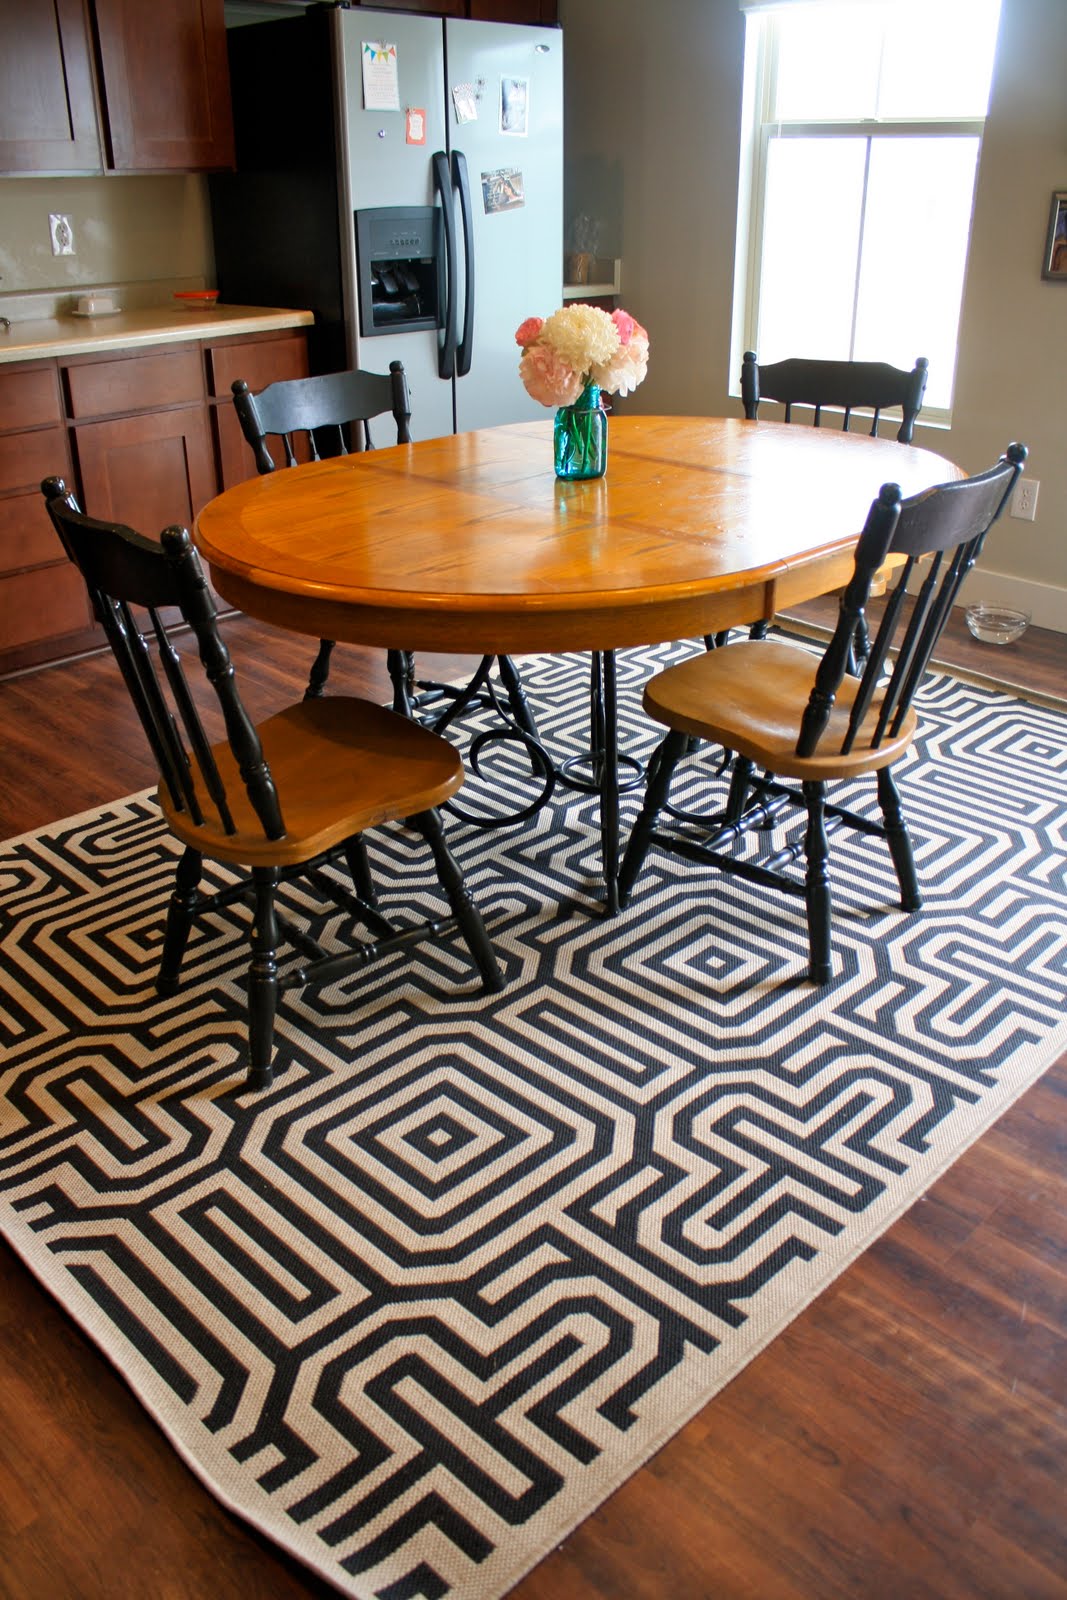 Dining Table, How Large Should A Round Rug Be Under Dining Table